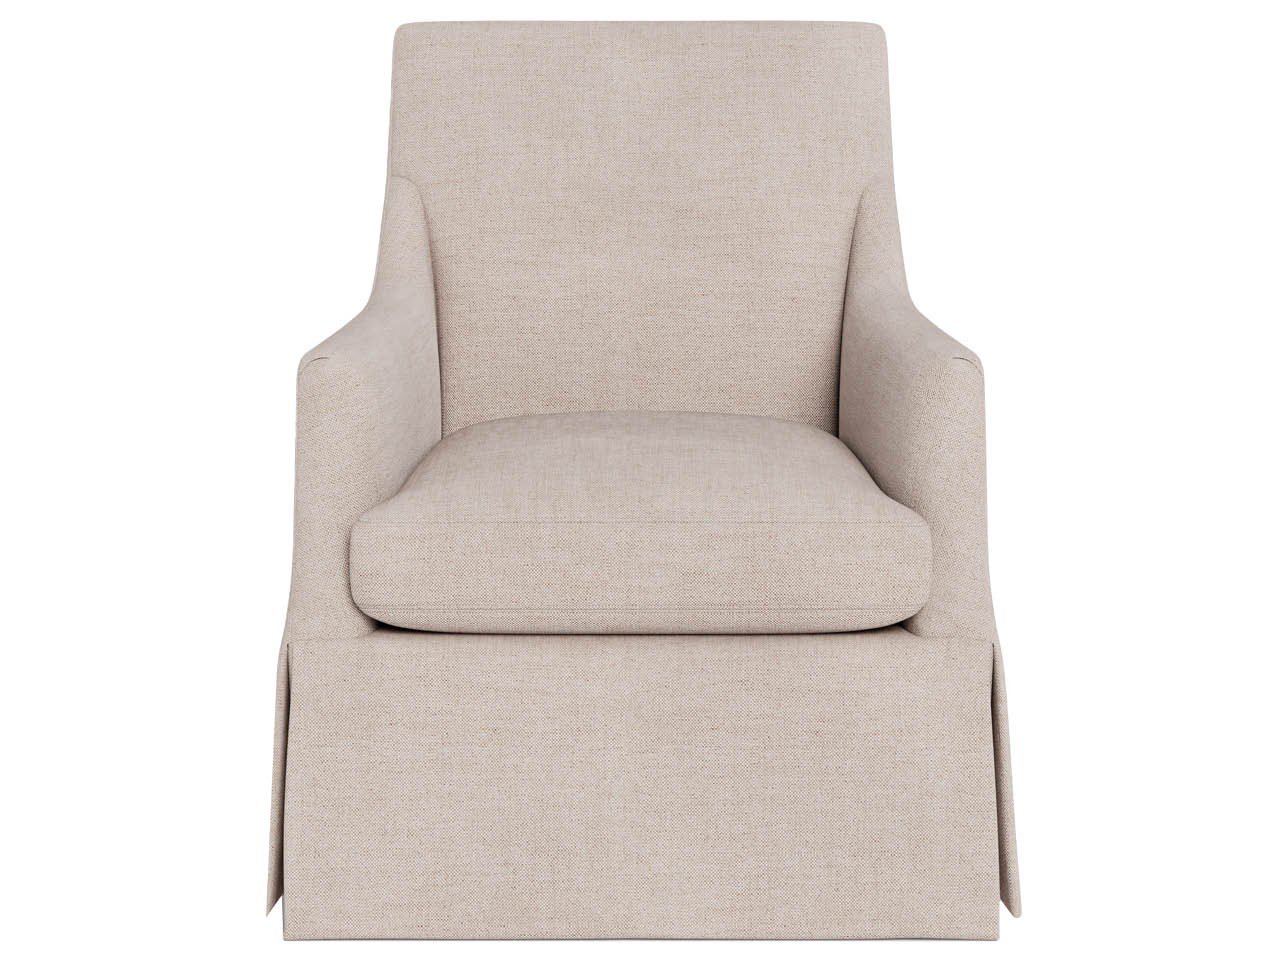 Anniston Swivel Chair - Special Order